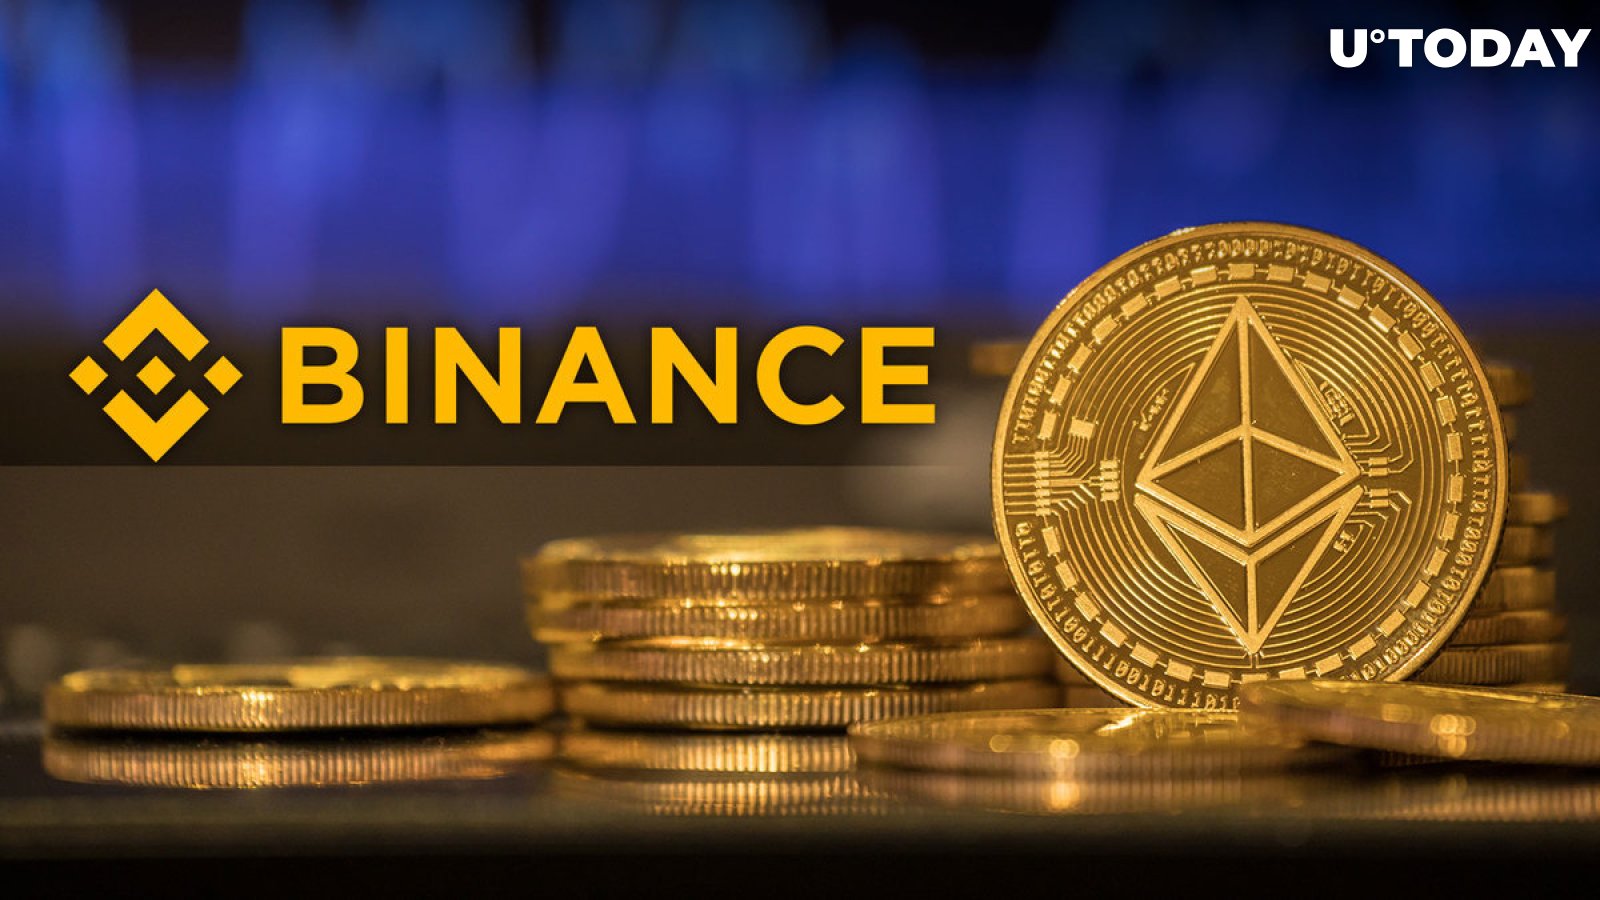 60,000 ETH Suddenly Bought on Binance Before ETH Suspension, Community Stunned